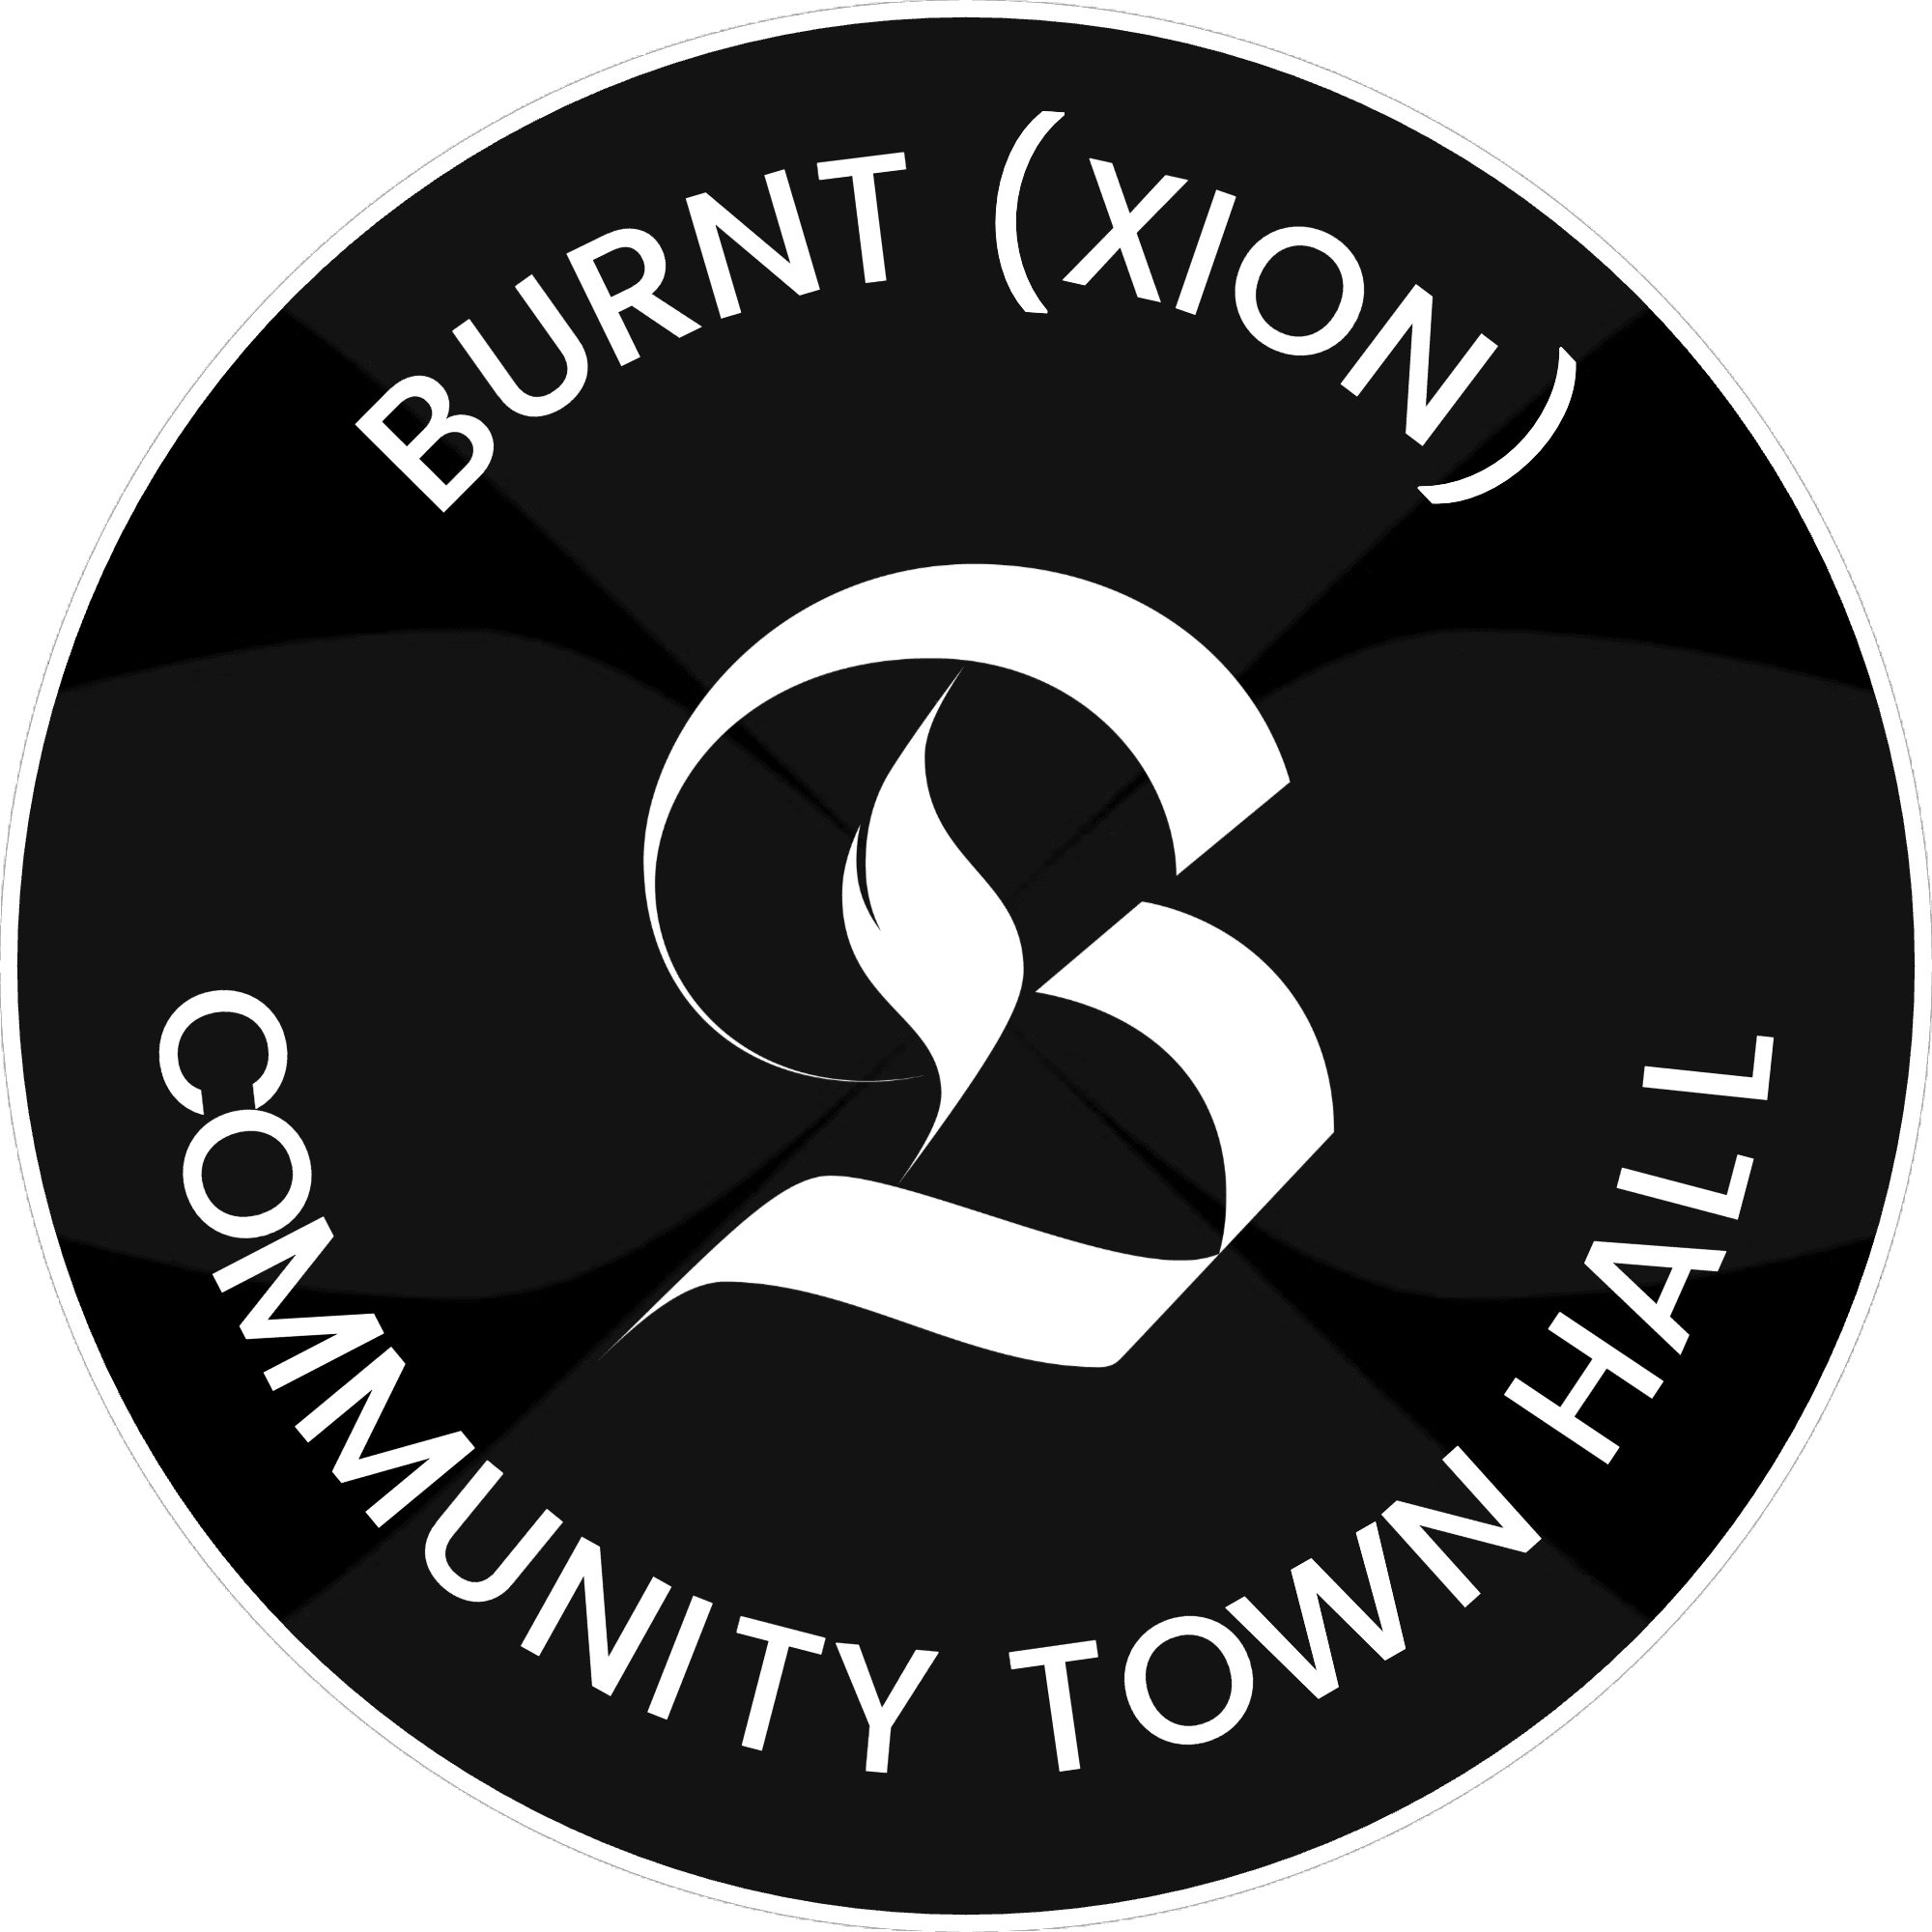 XION First Community Town Hall